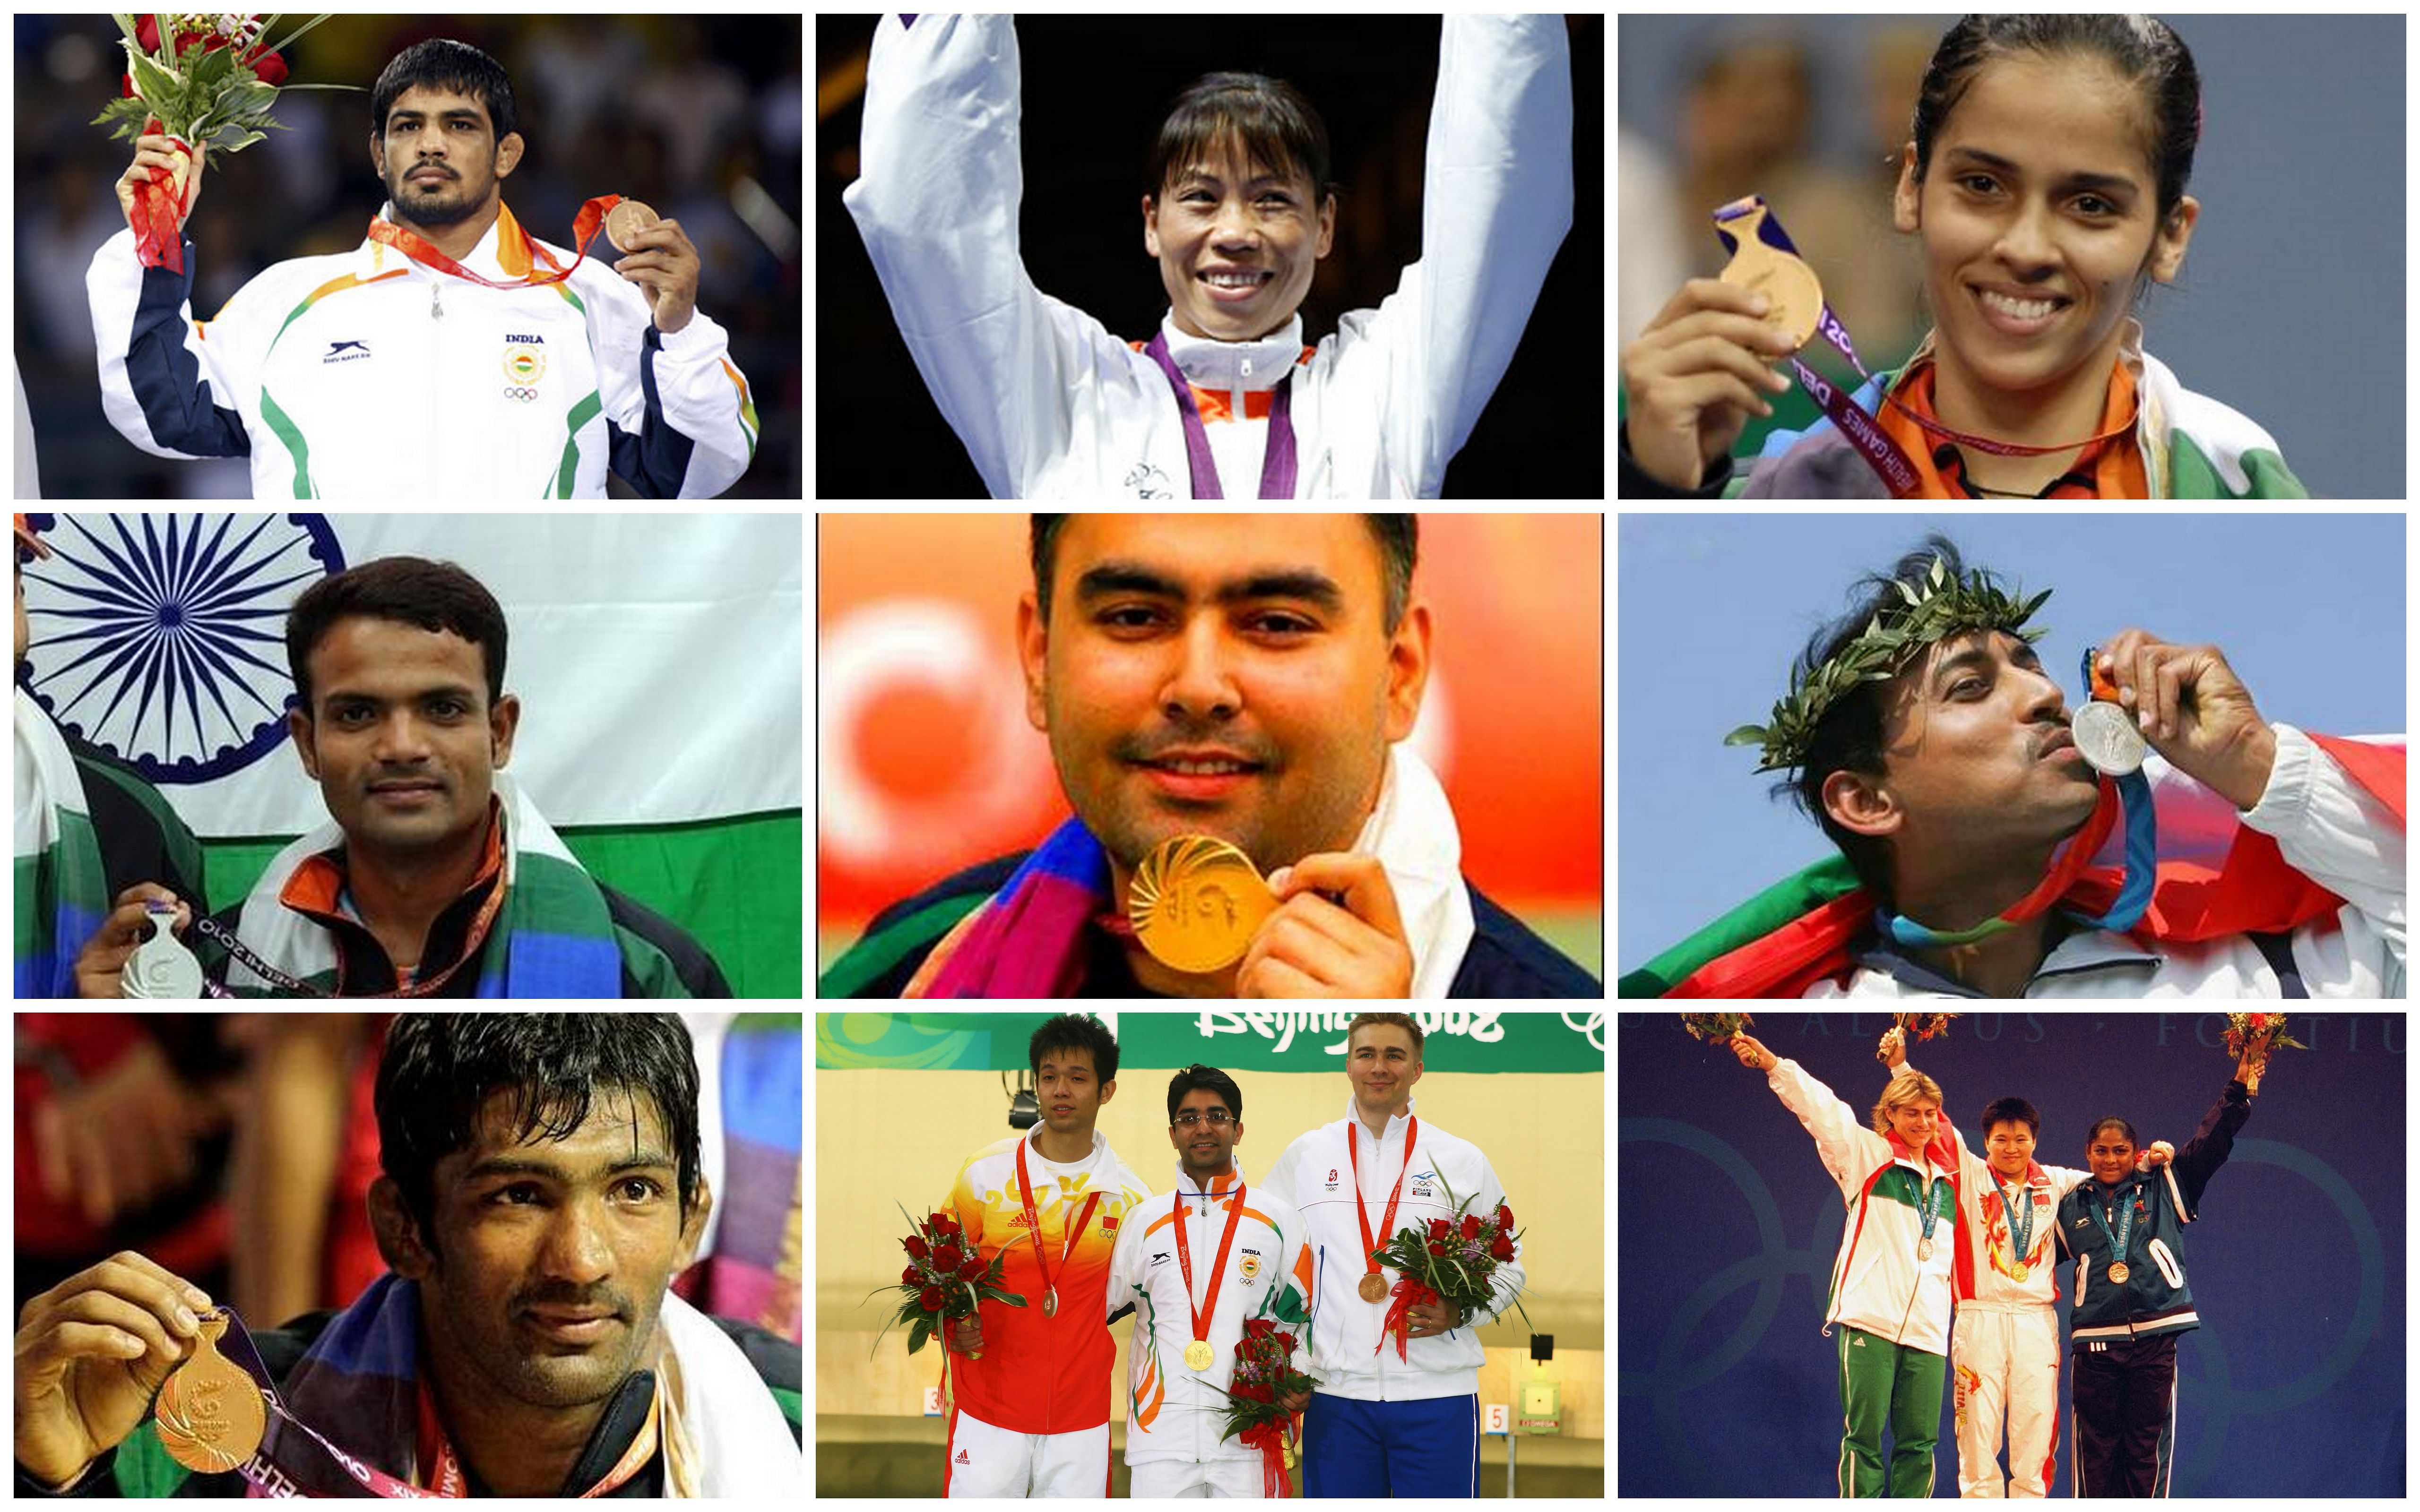 Page 2 12 photos of Indian sports achievements that will make you